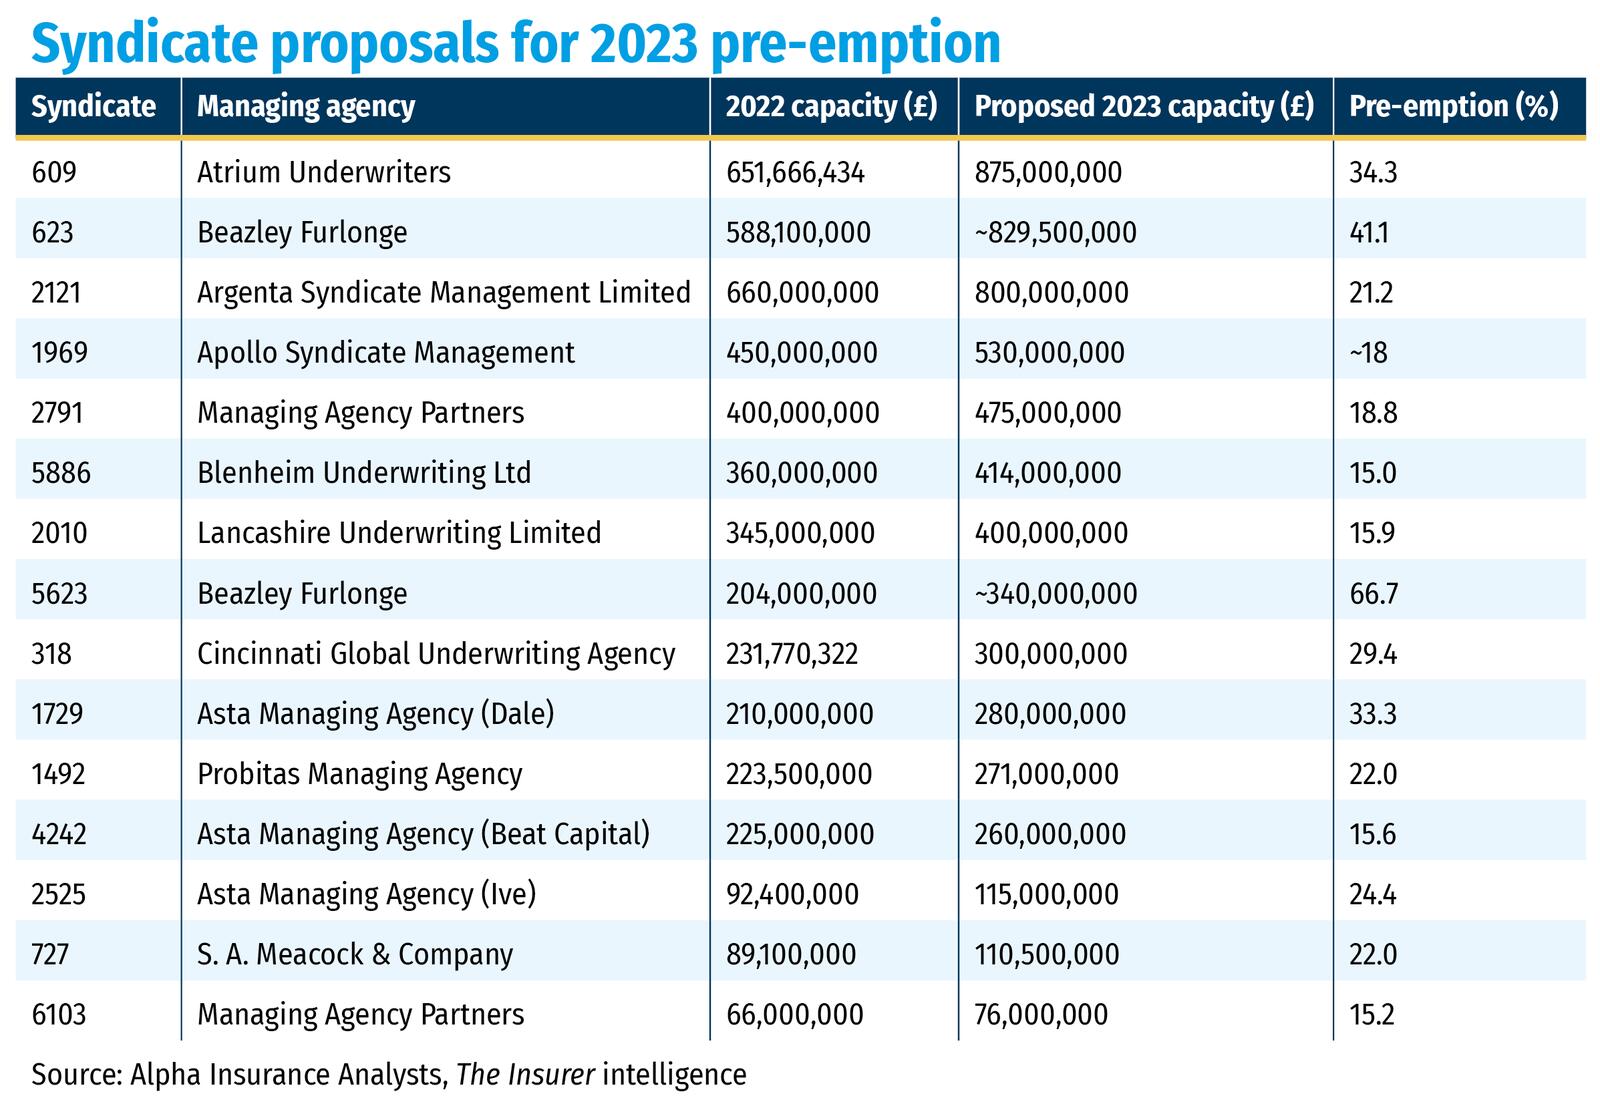 Syndicate proposals for 2023 pre-emption